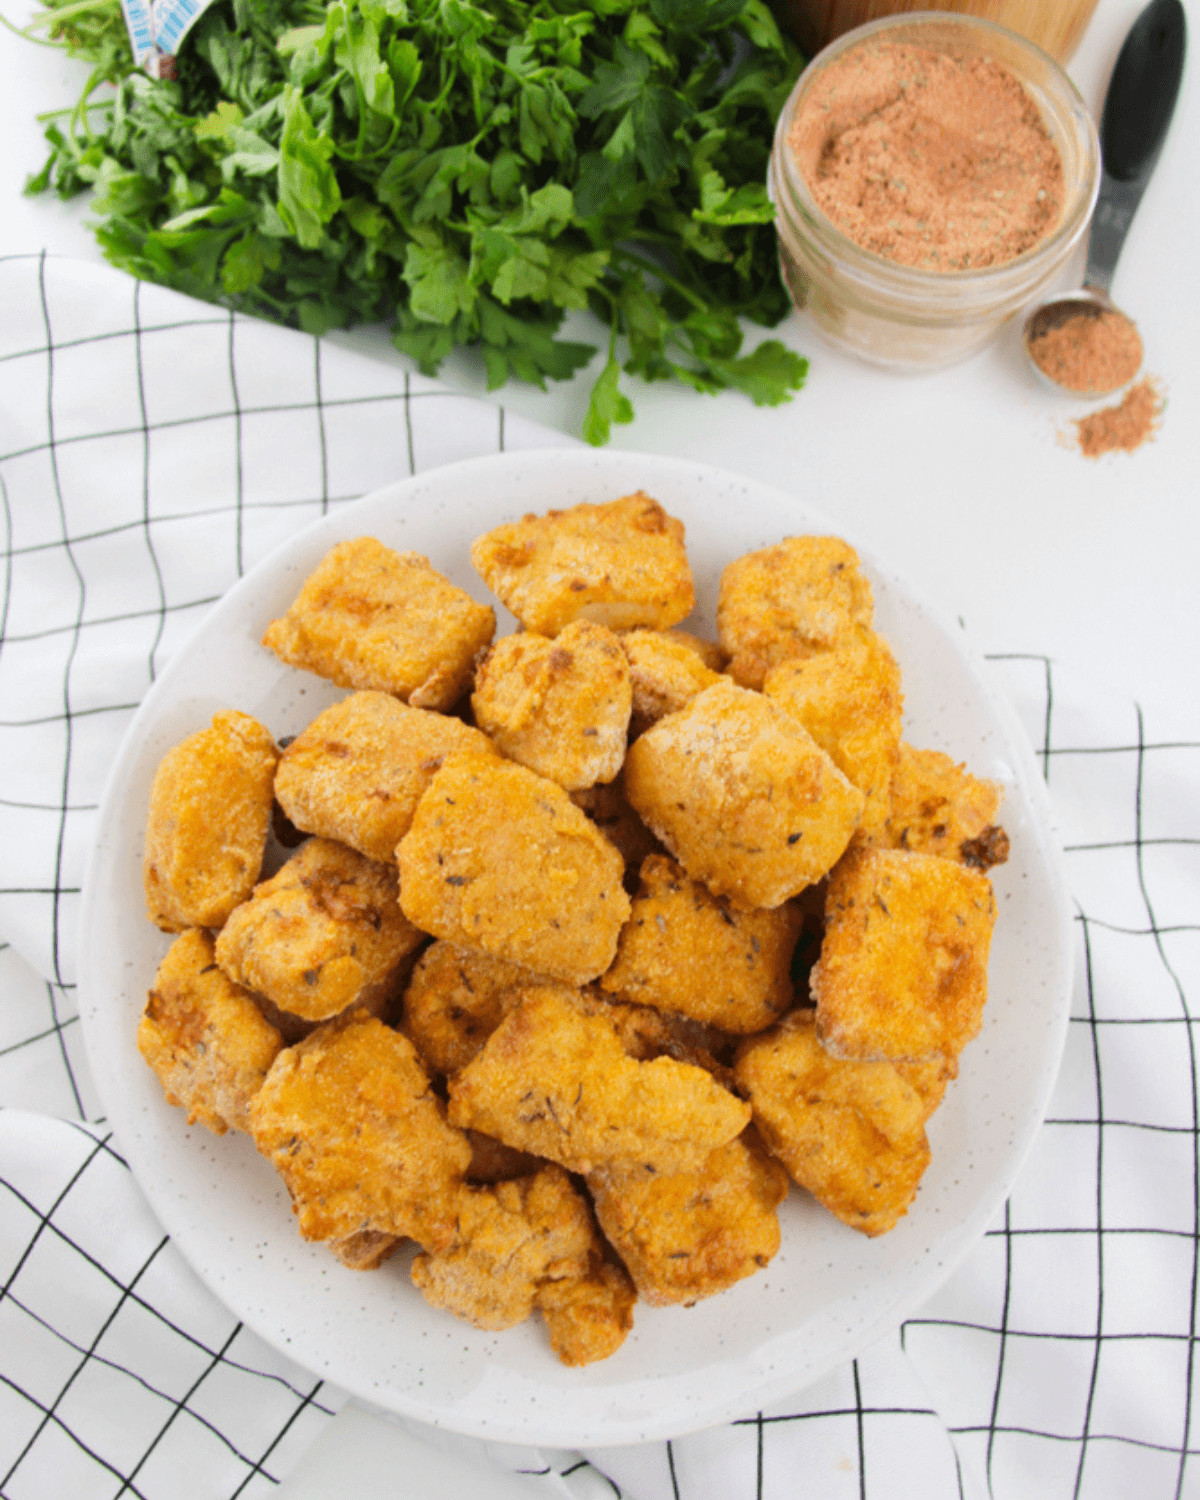 A heaping platter of the air fryer catfish nuggets.